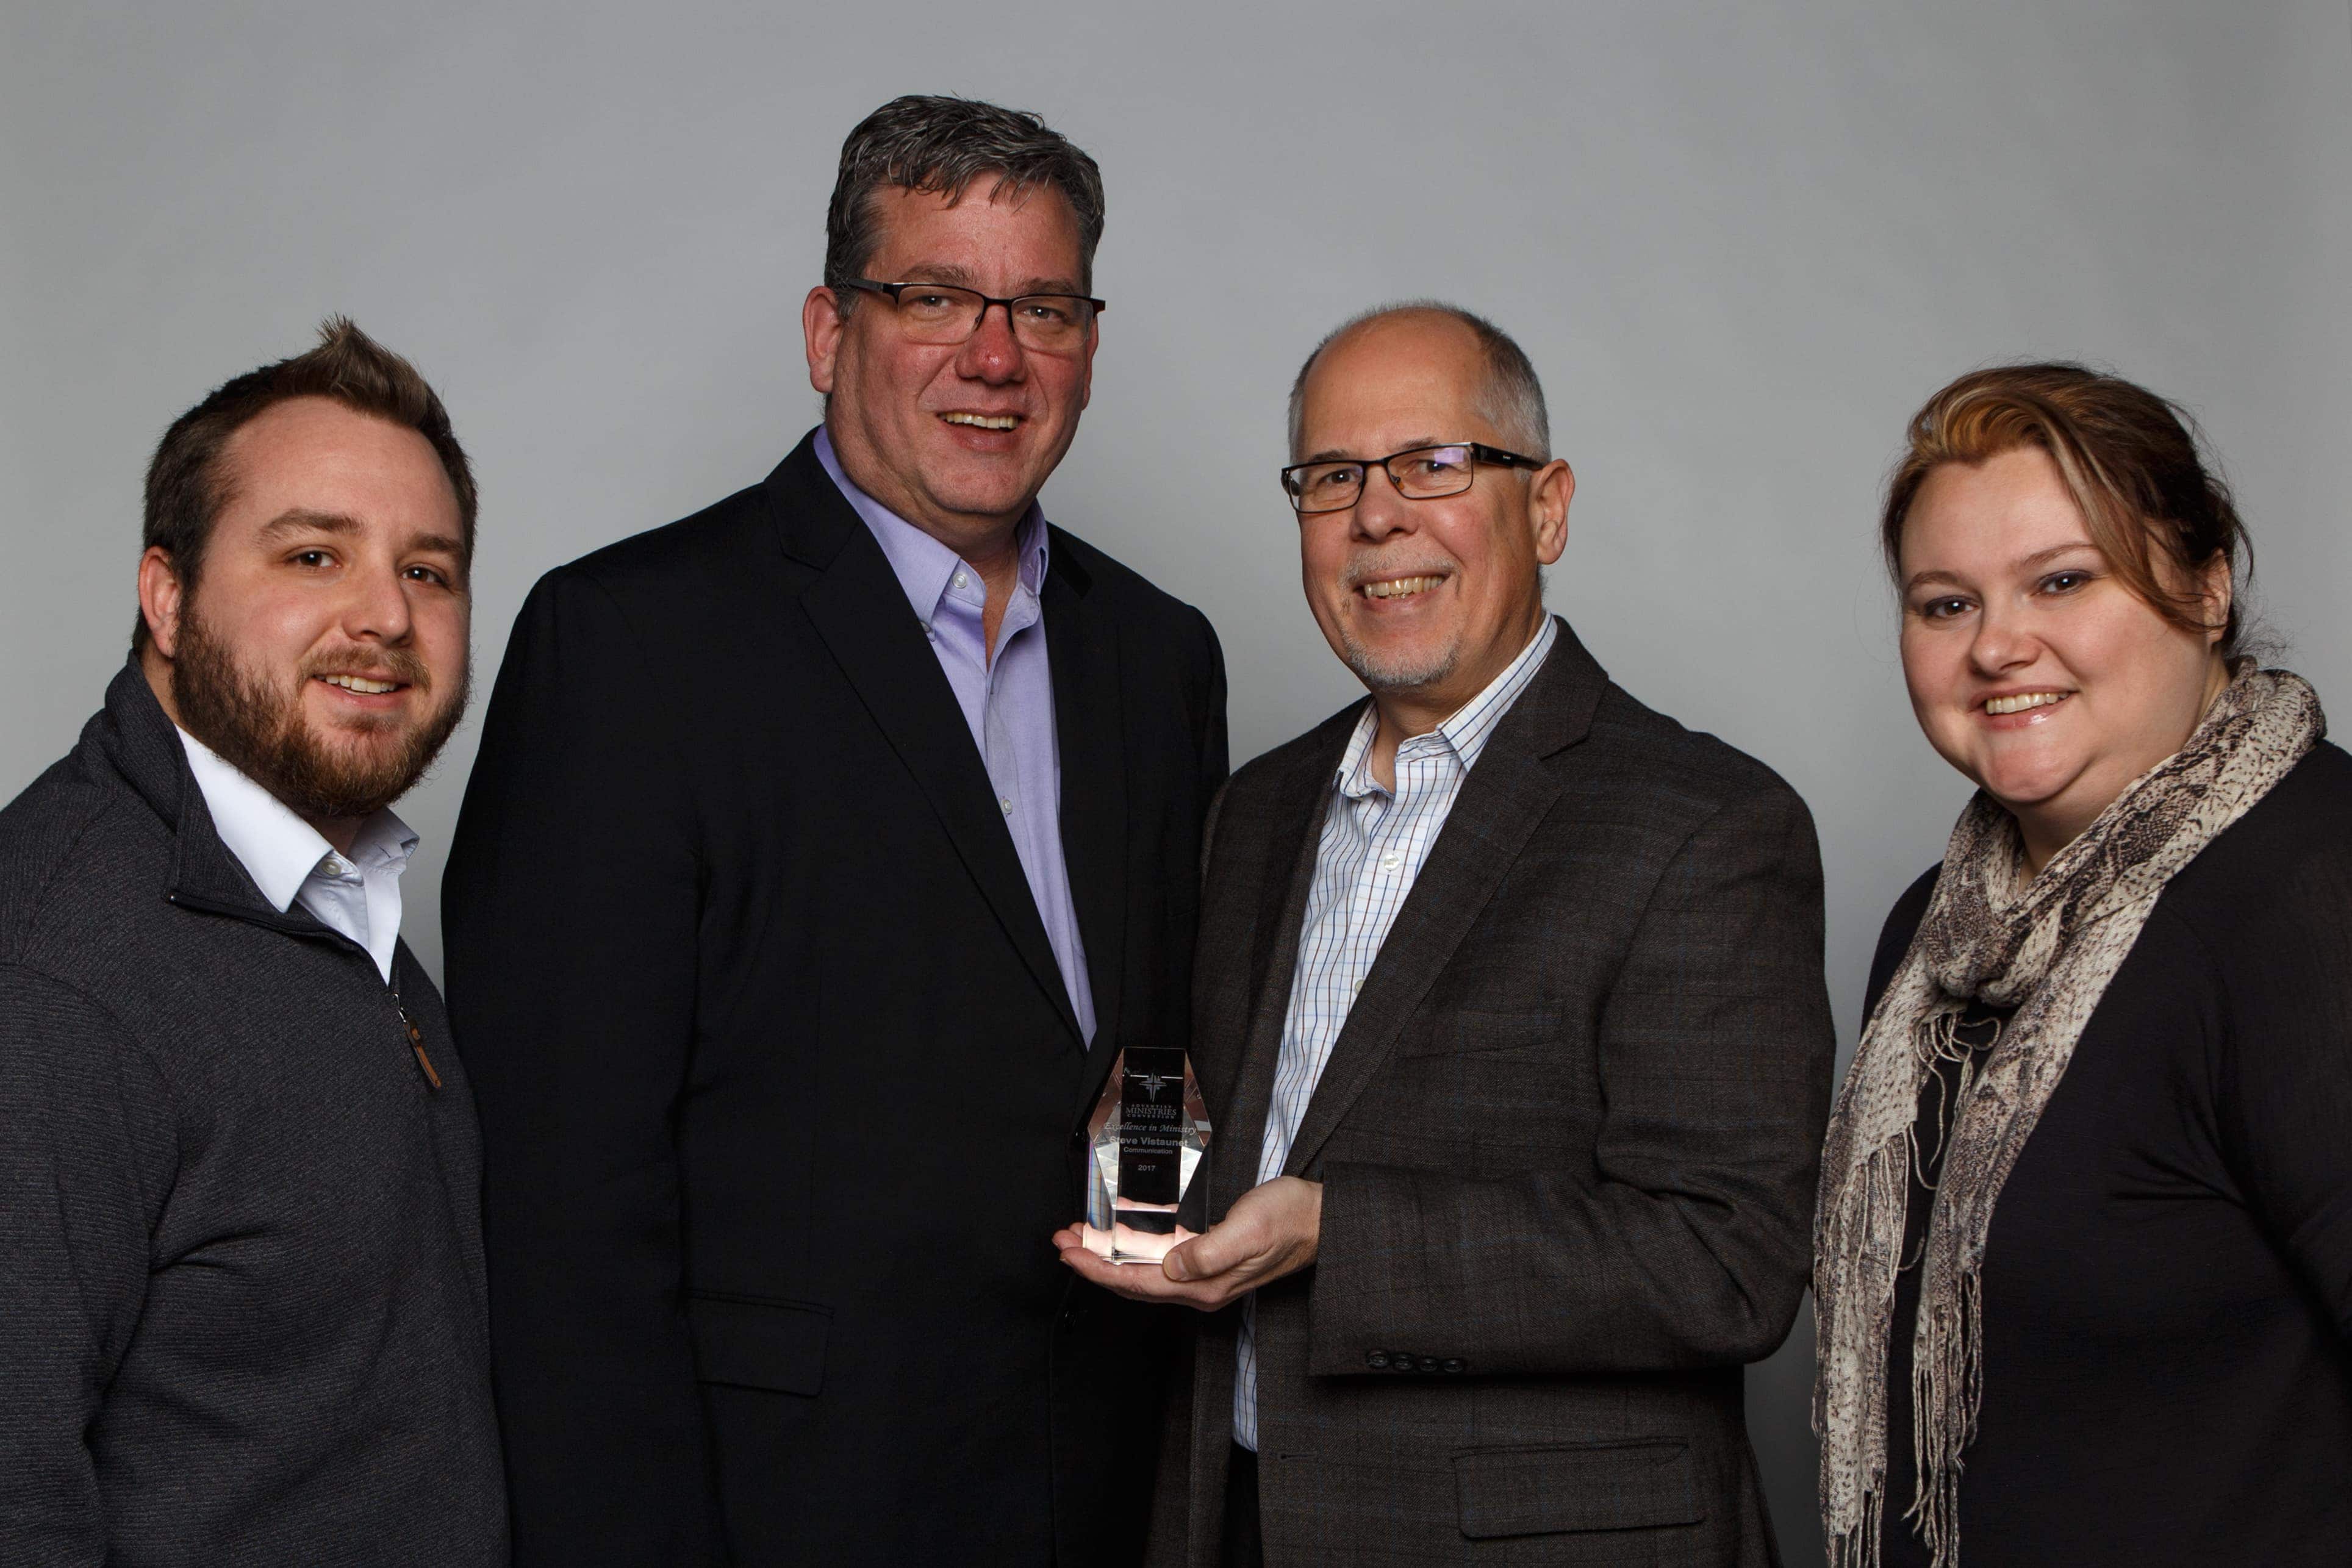 Left to right: Anthony White, Dan Weber, Steve Vistaunet, and Desiree Lockwood take a moment to celebrate the 2017 AMC Lifetime Achievement Award in Communication that Vistaunet was given at the ministries convention in January 2017. Photo provided by the North Pacific Union Gleaner.